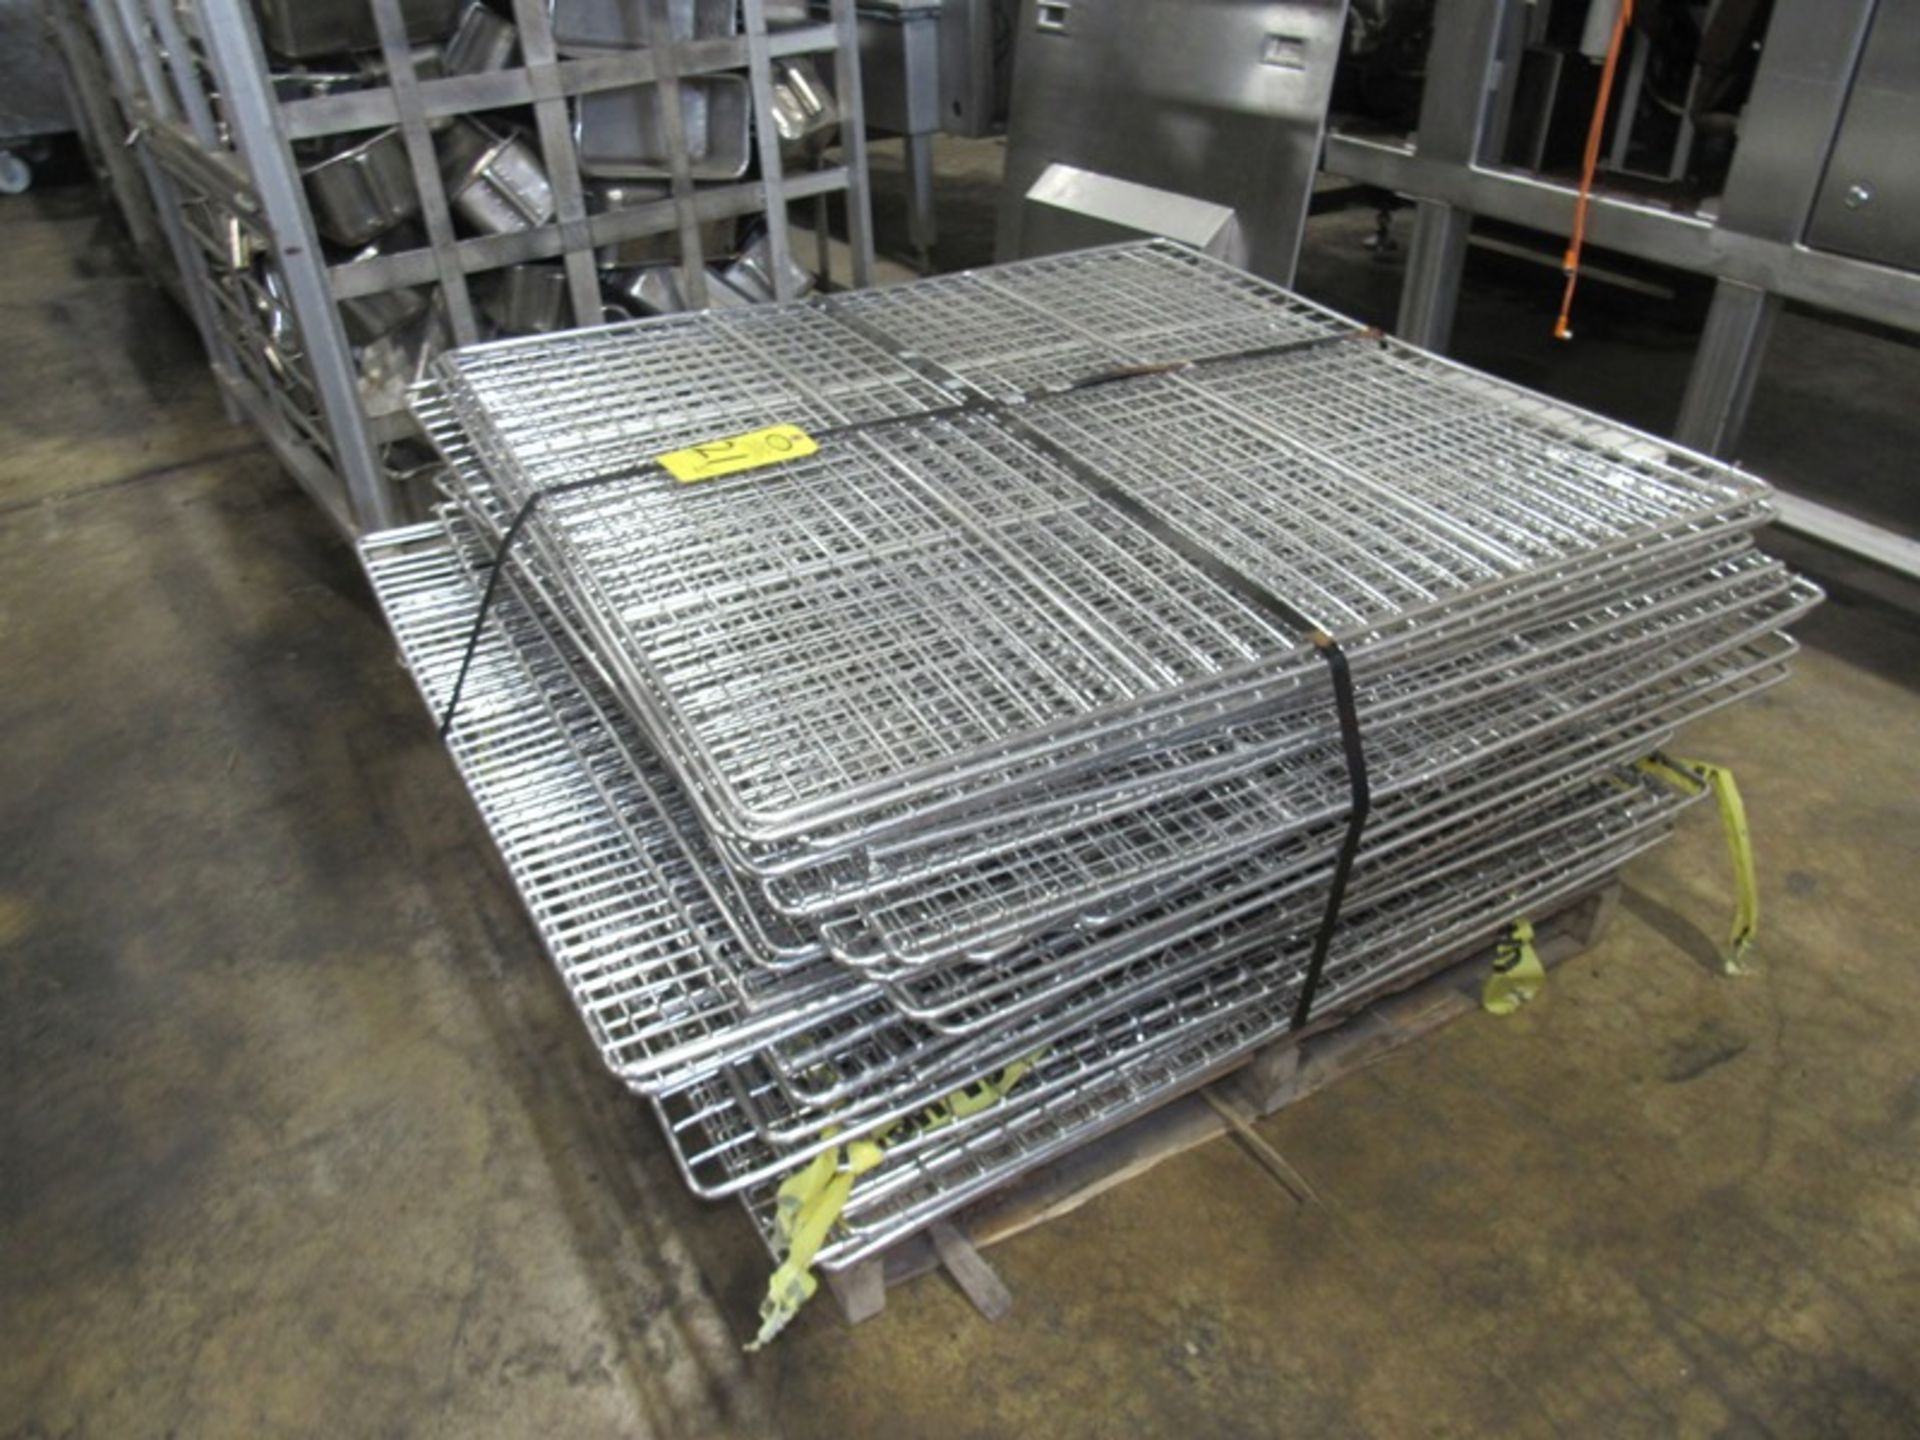 Stainless Steel Smoke Screens, 42" W X 44" L, Located in Plano, Illinois (Equipment must be